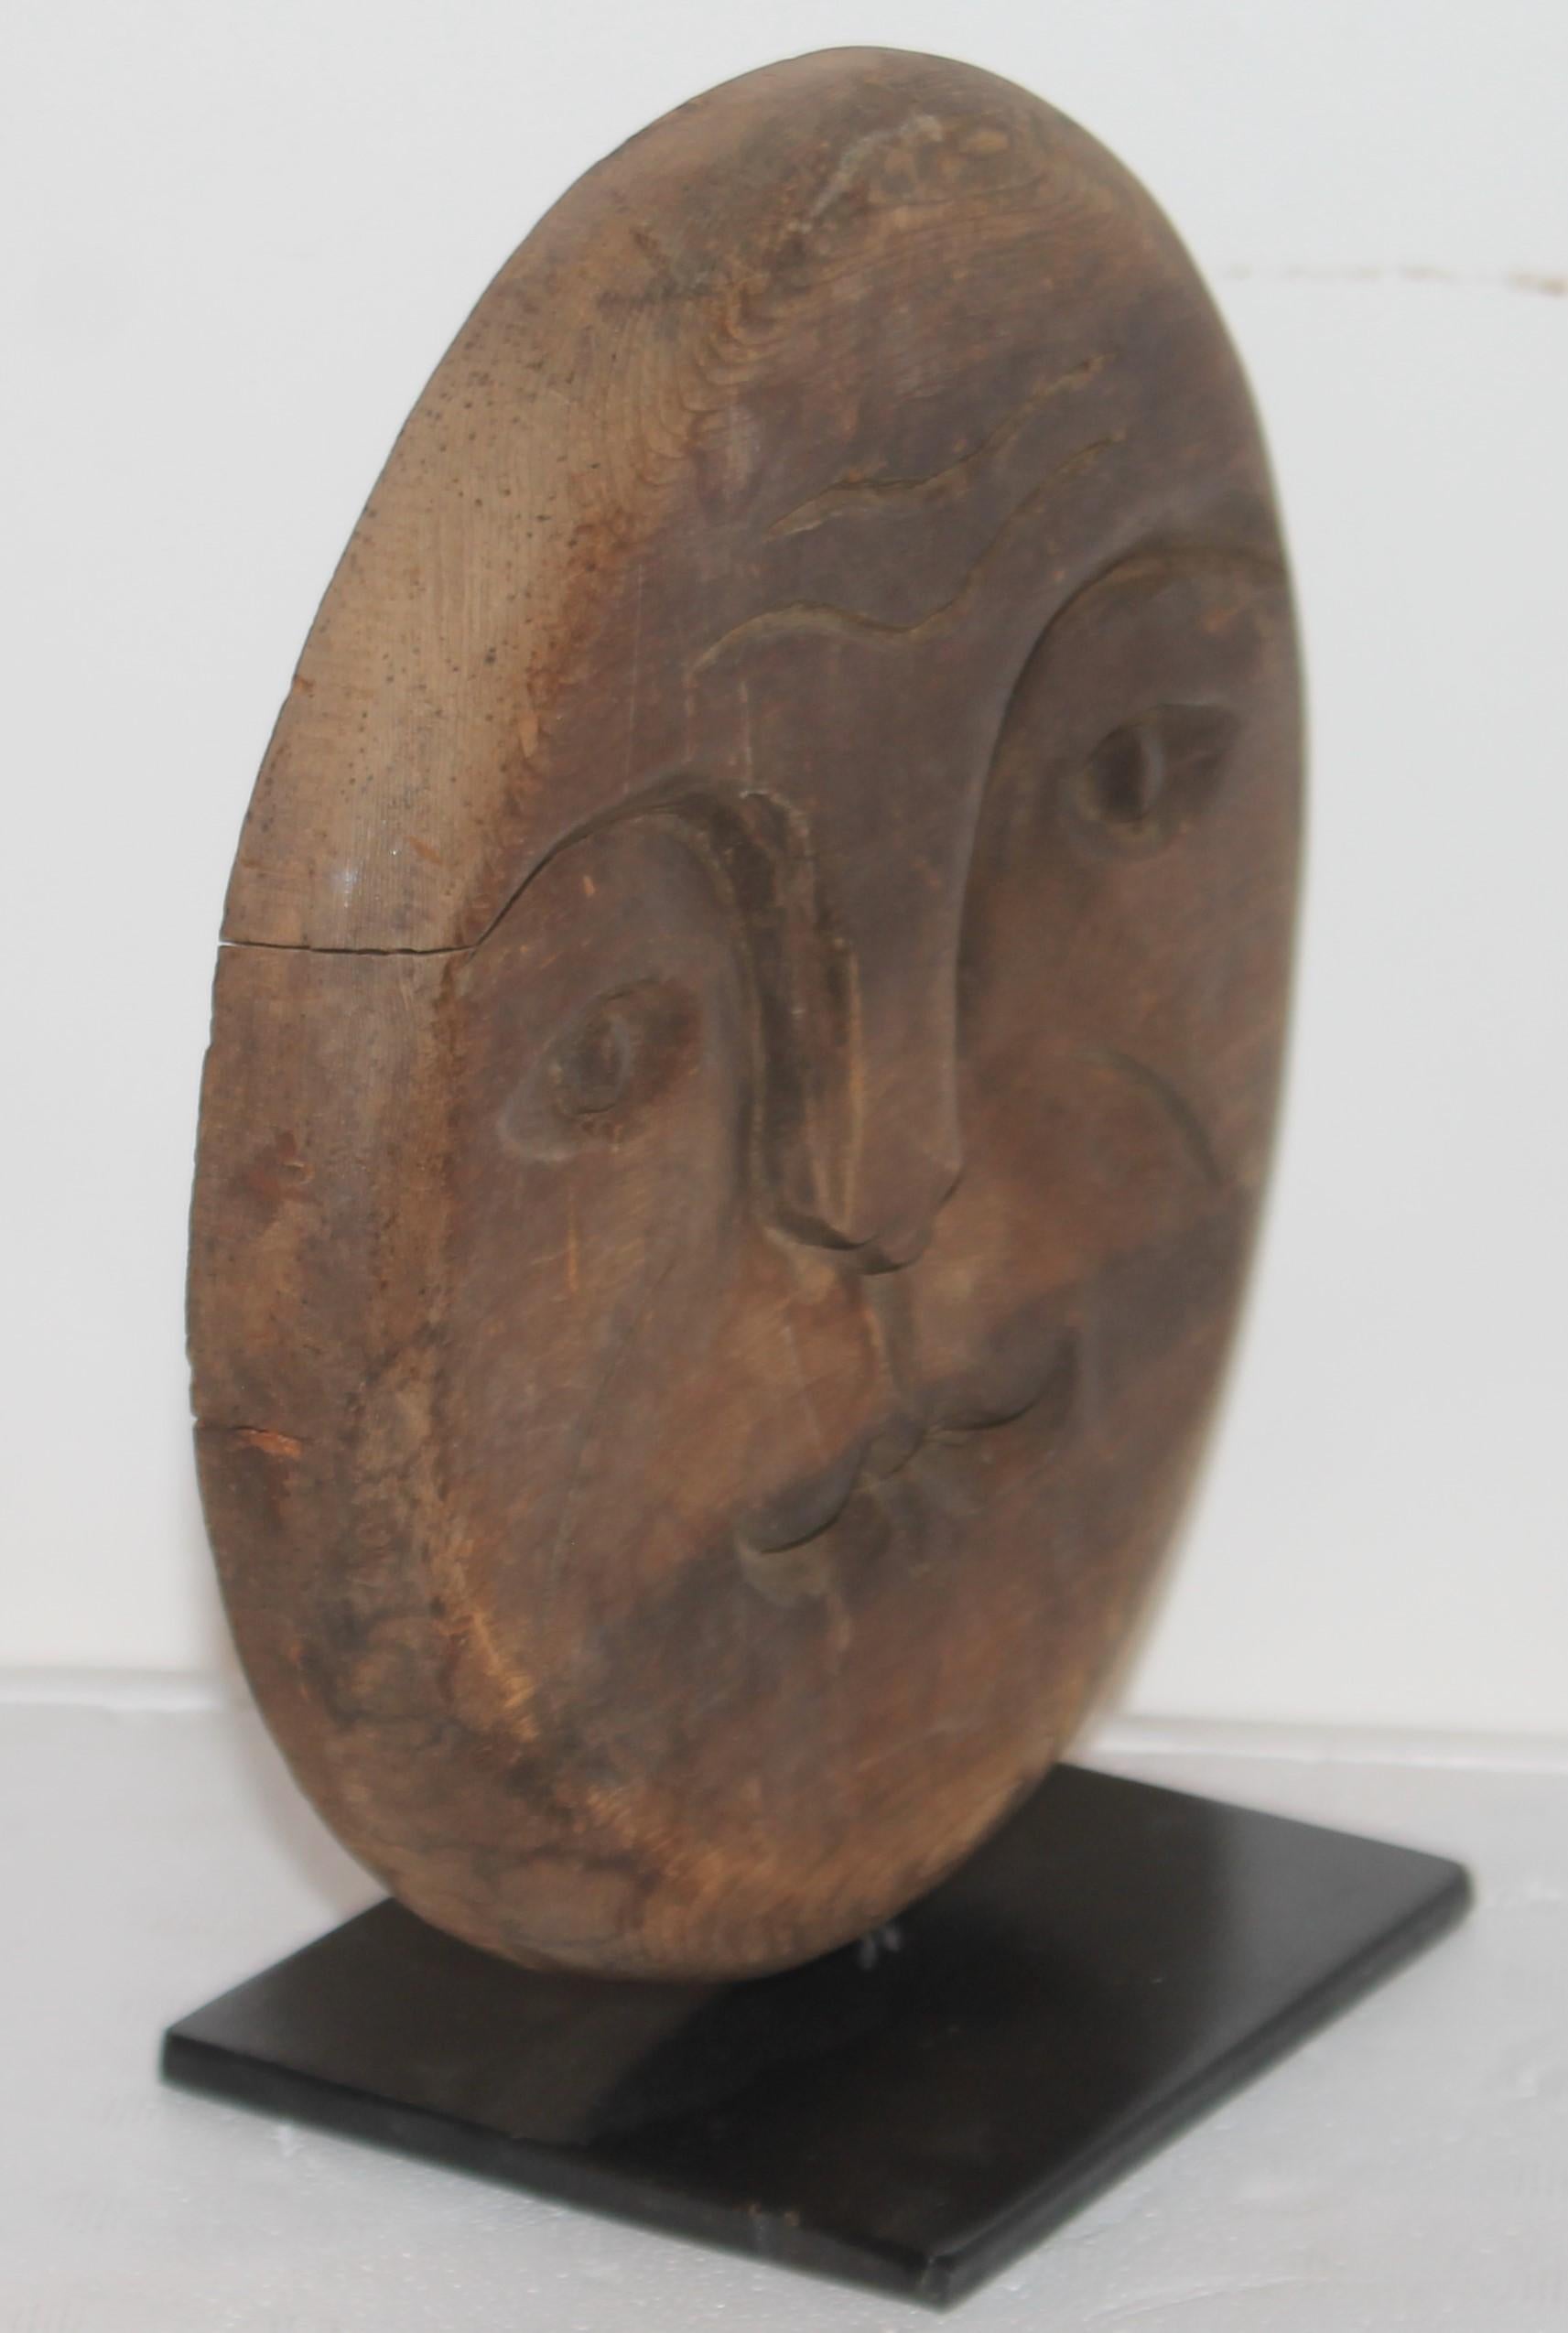 the man with the wooden face